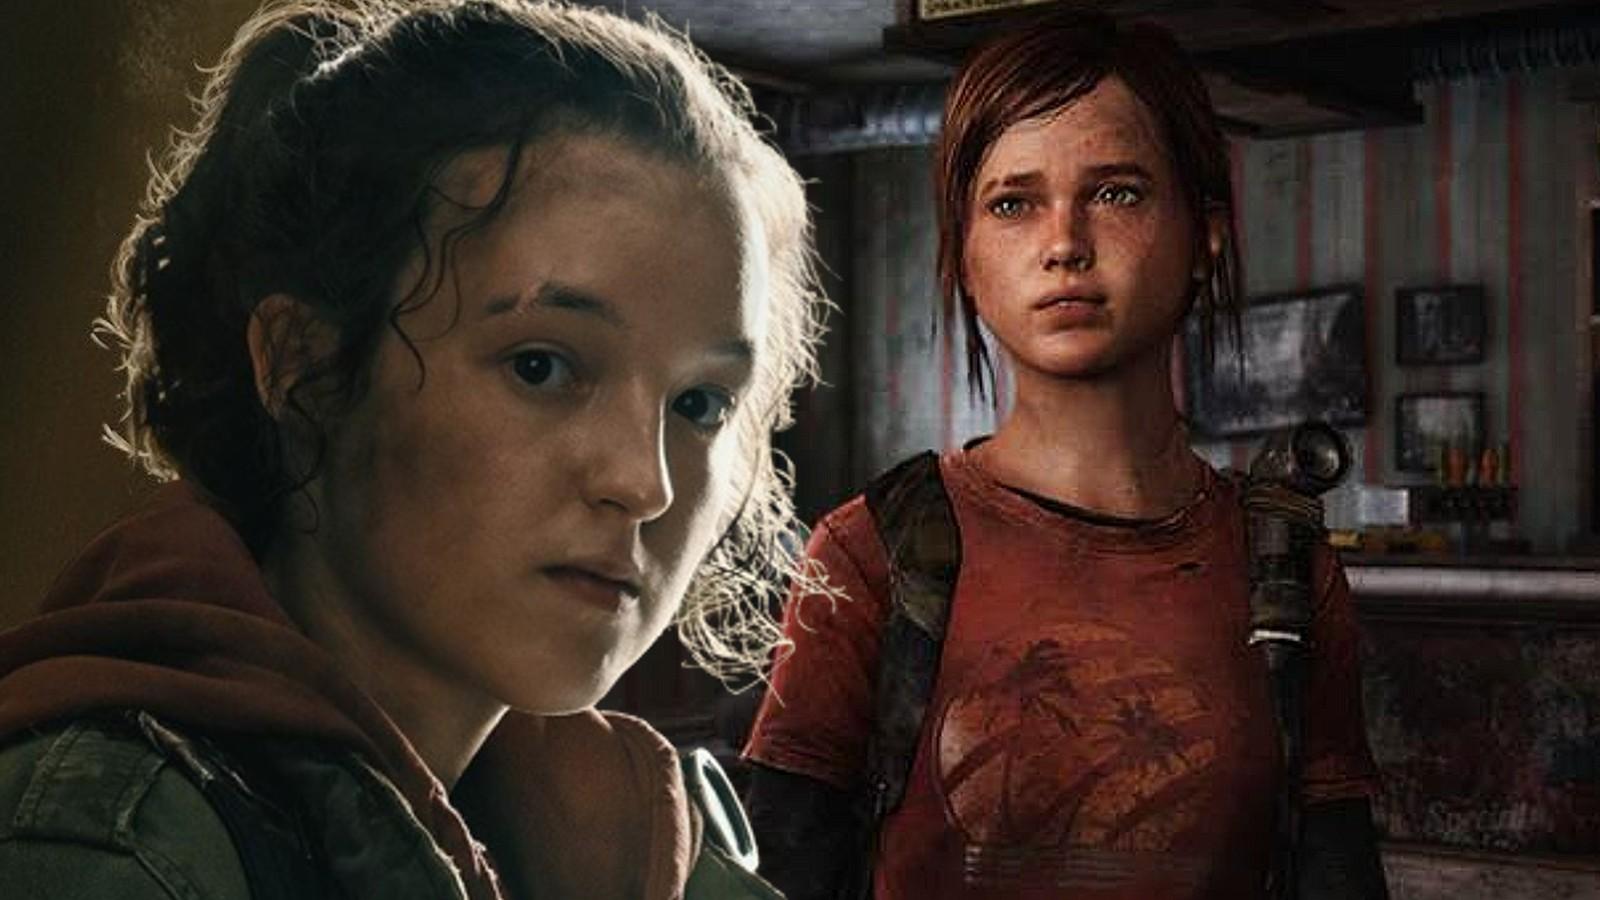 Bella Ramsey and Ellie in The Last of Us HBO show and game